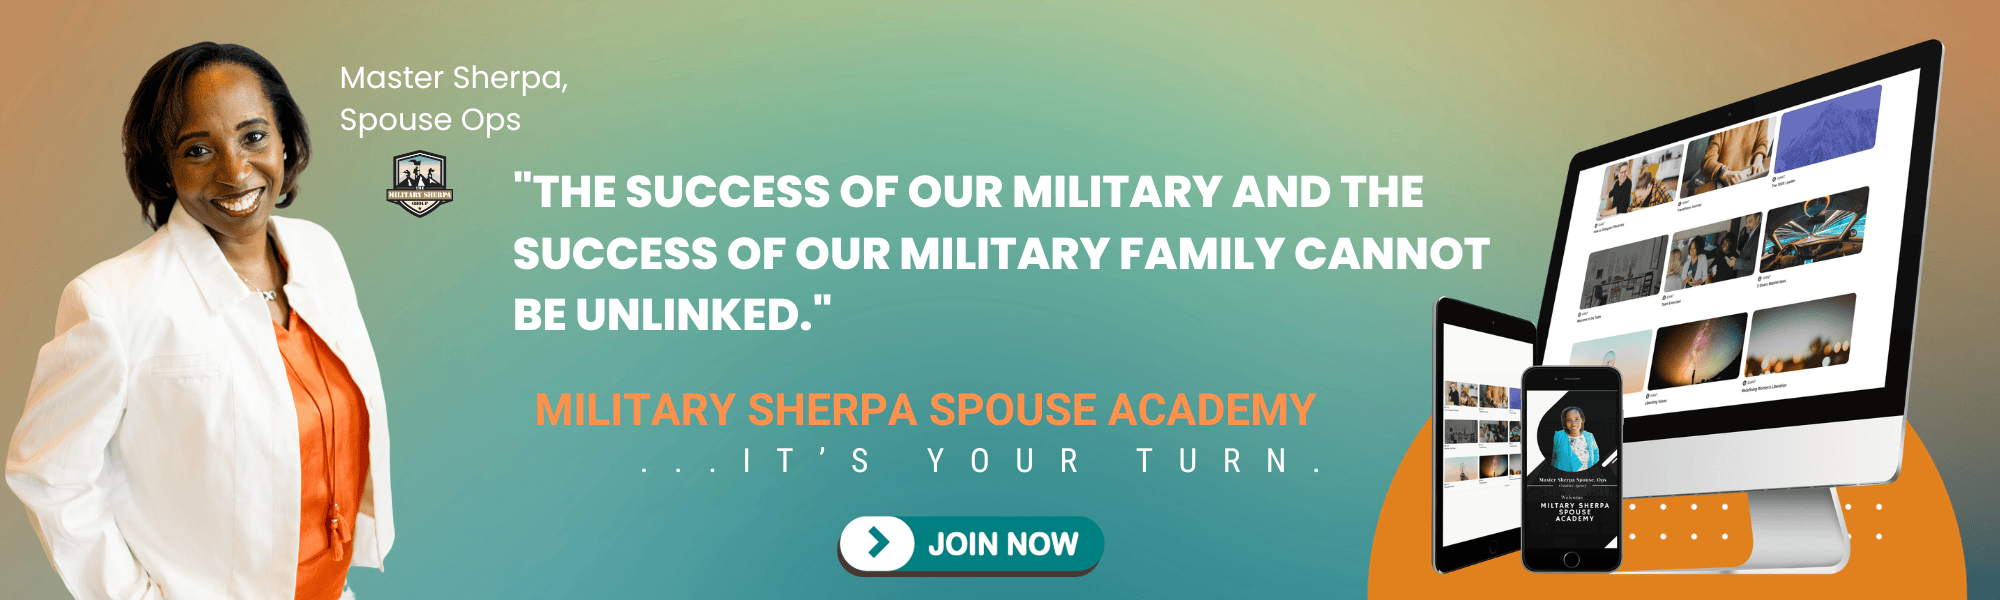 Military Sherpa Spouse Academy